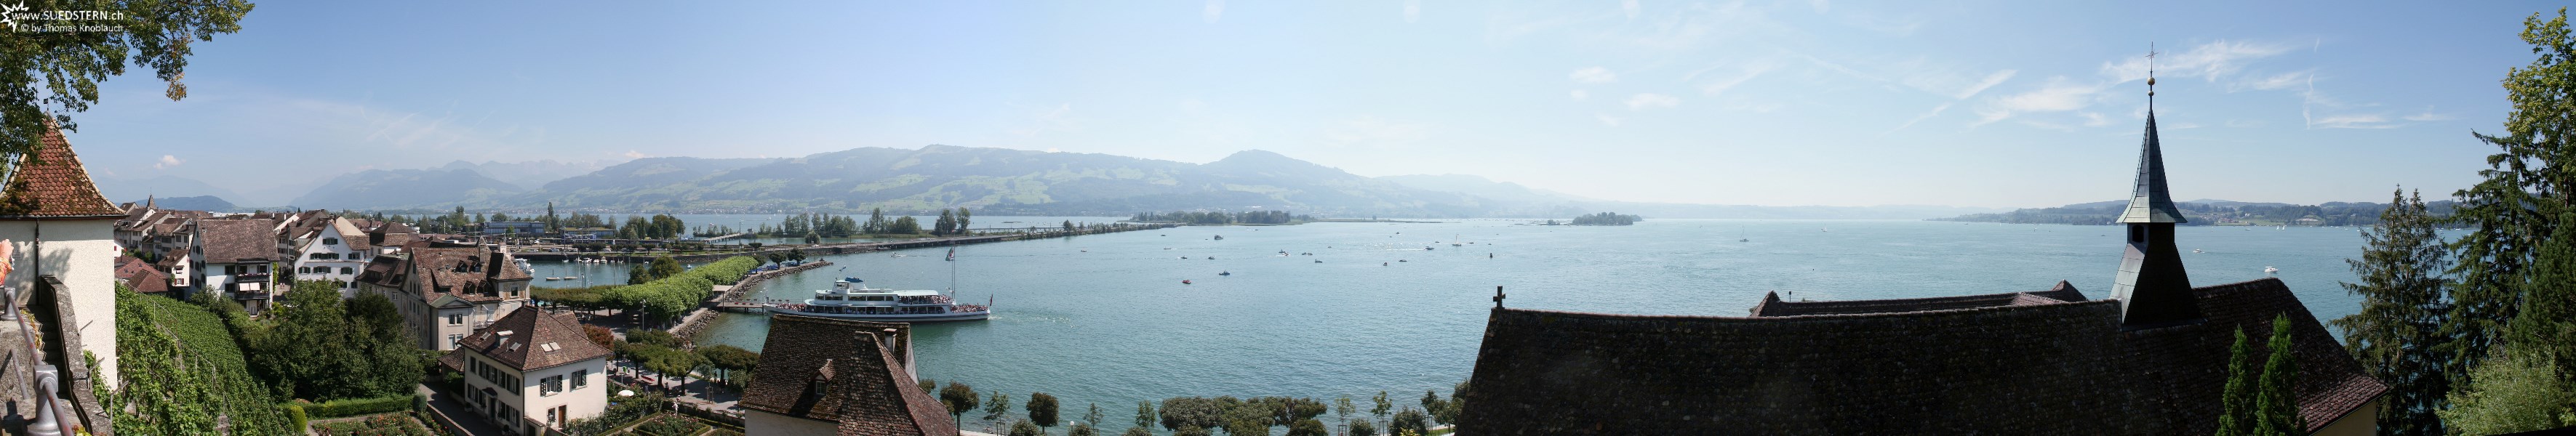 2007-08-05 - Panoramic view from Schloss Rapperswil